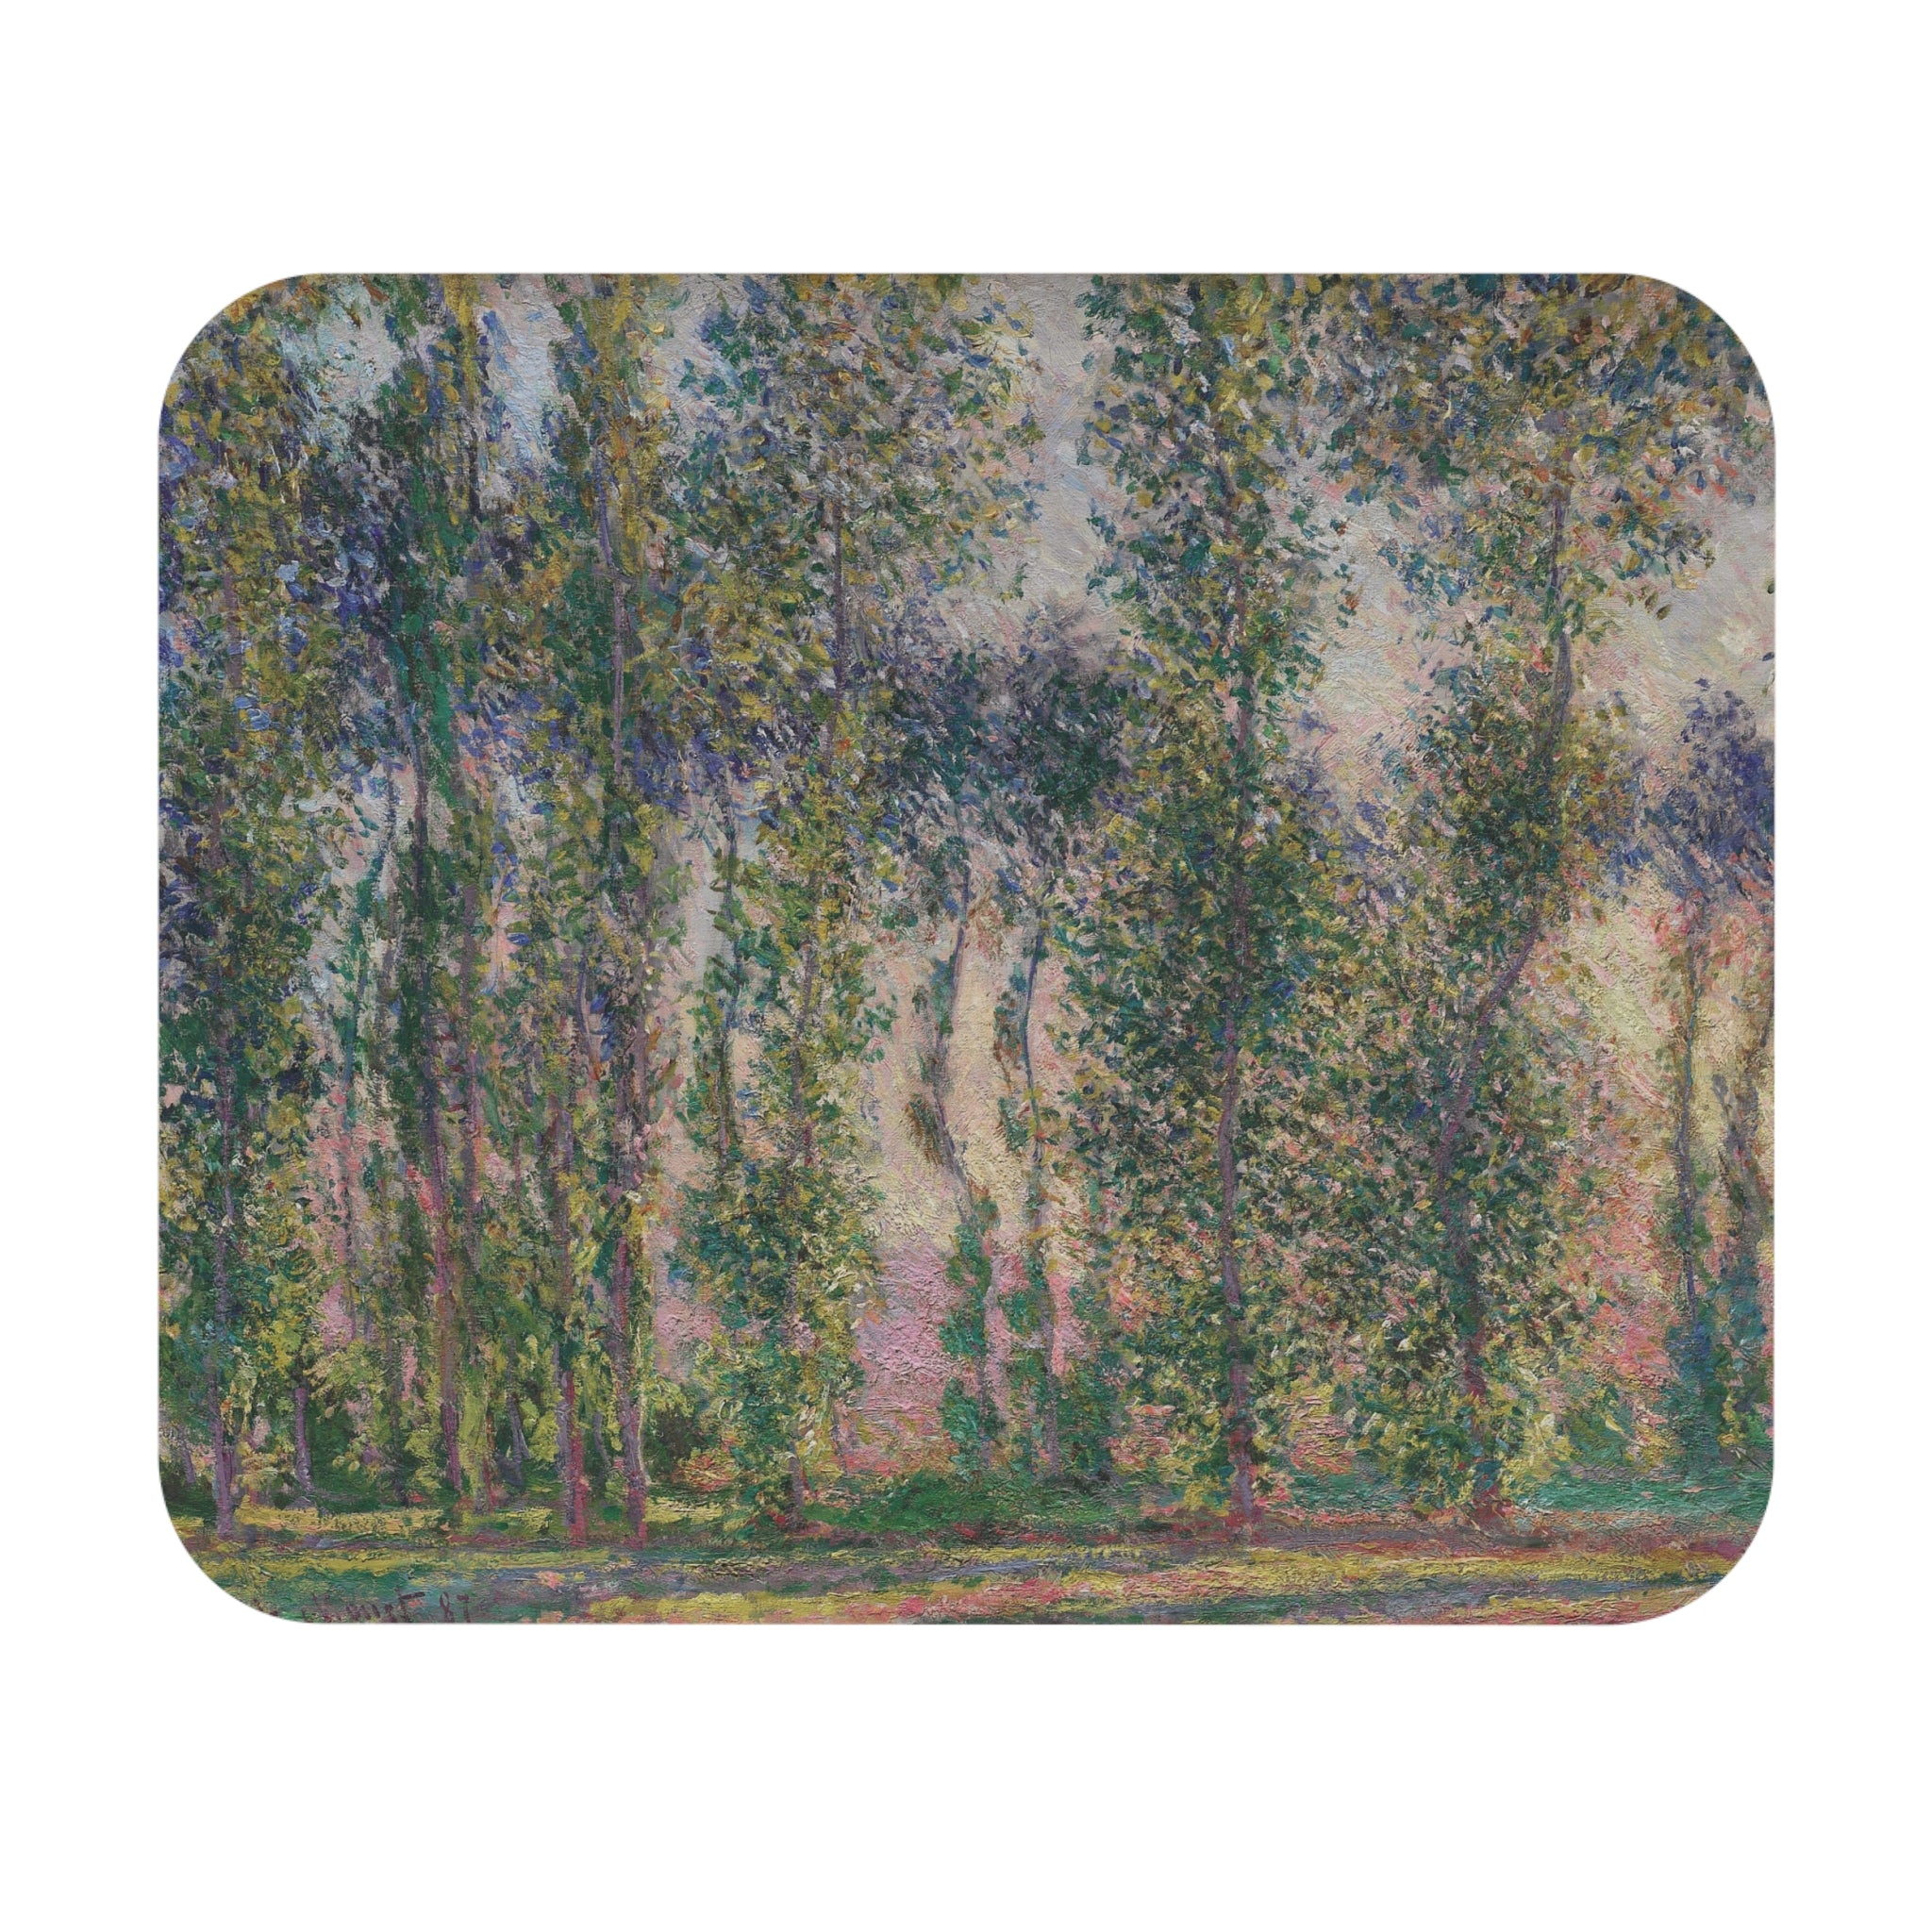 Poplars at Giverny 1887 - Claude Monet - Mouse pad  (Rectangle)